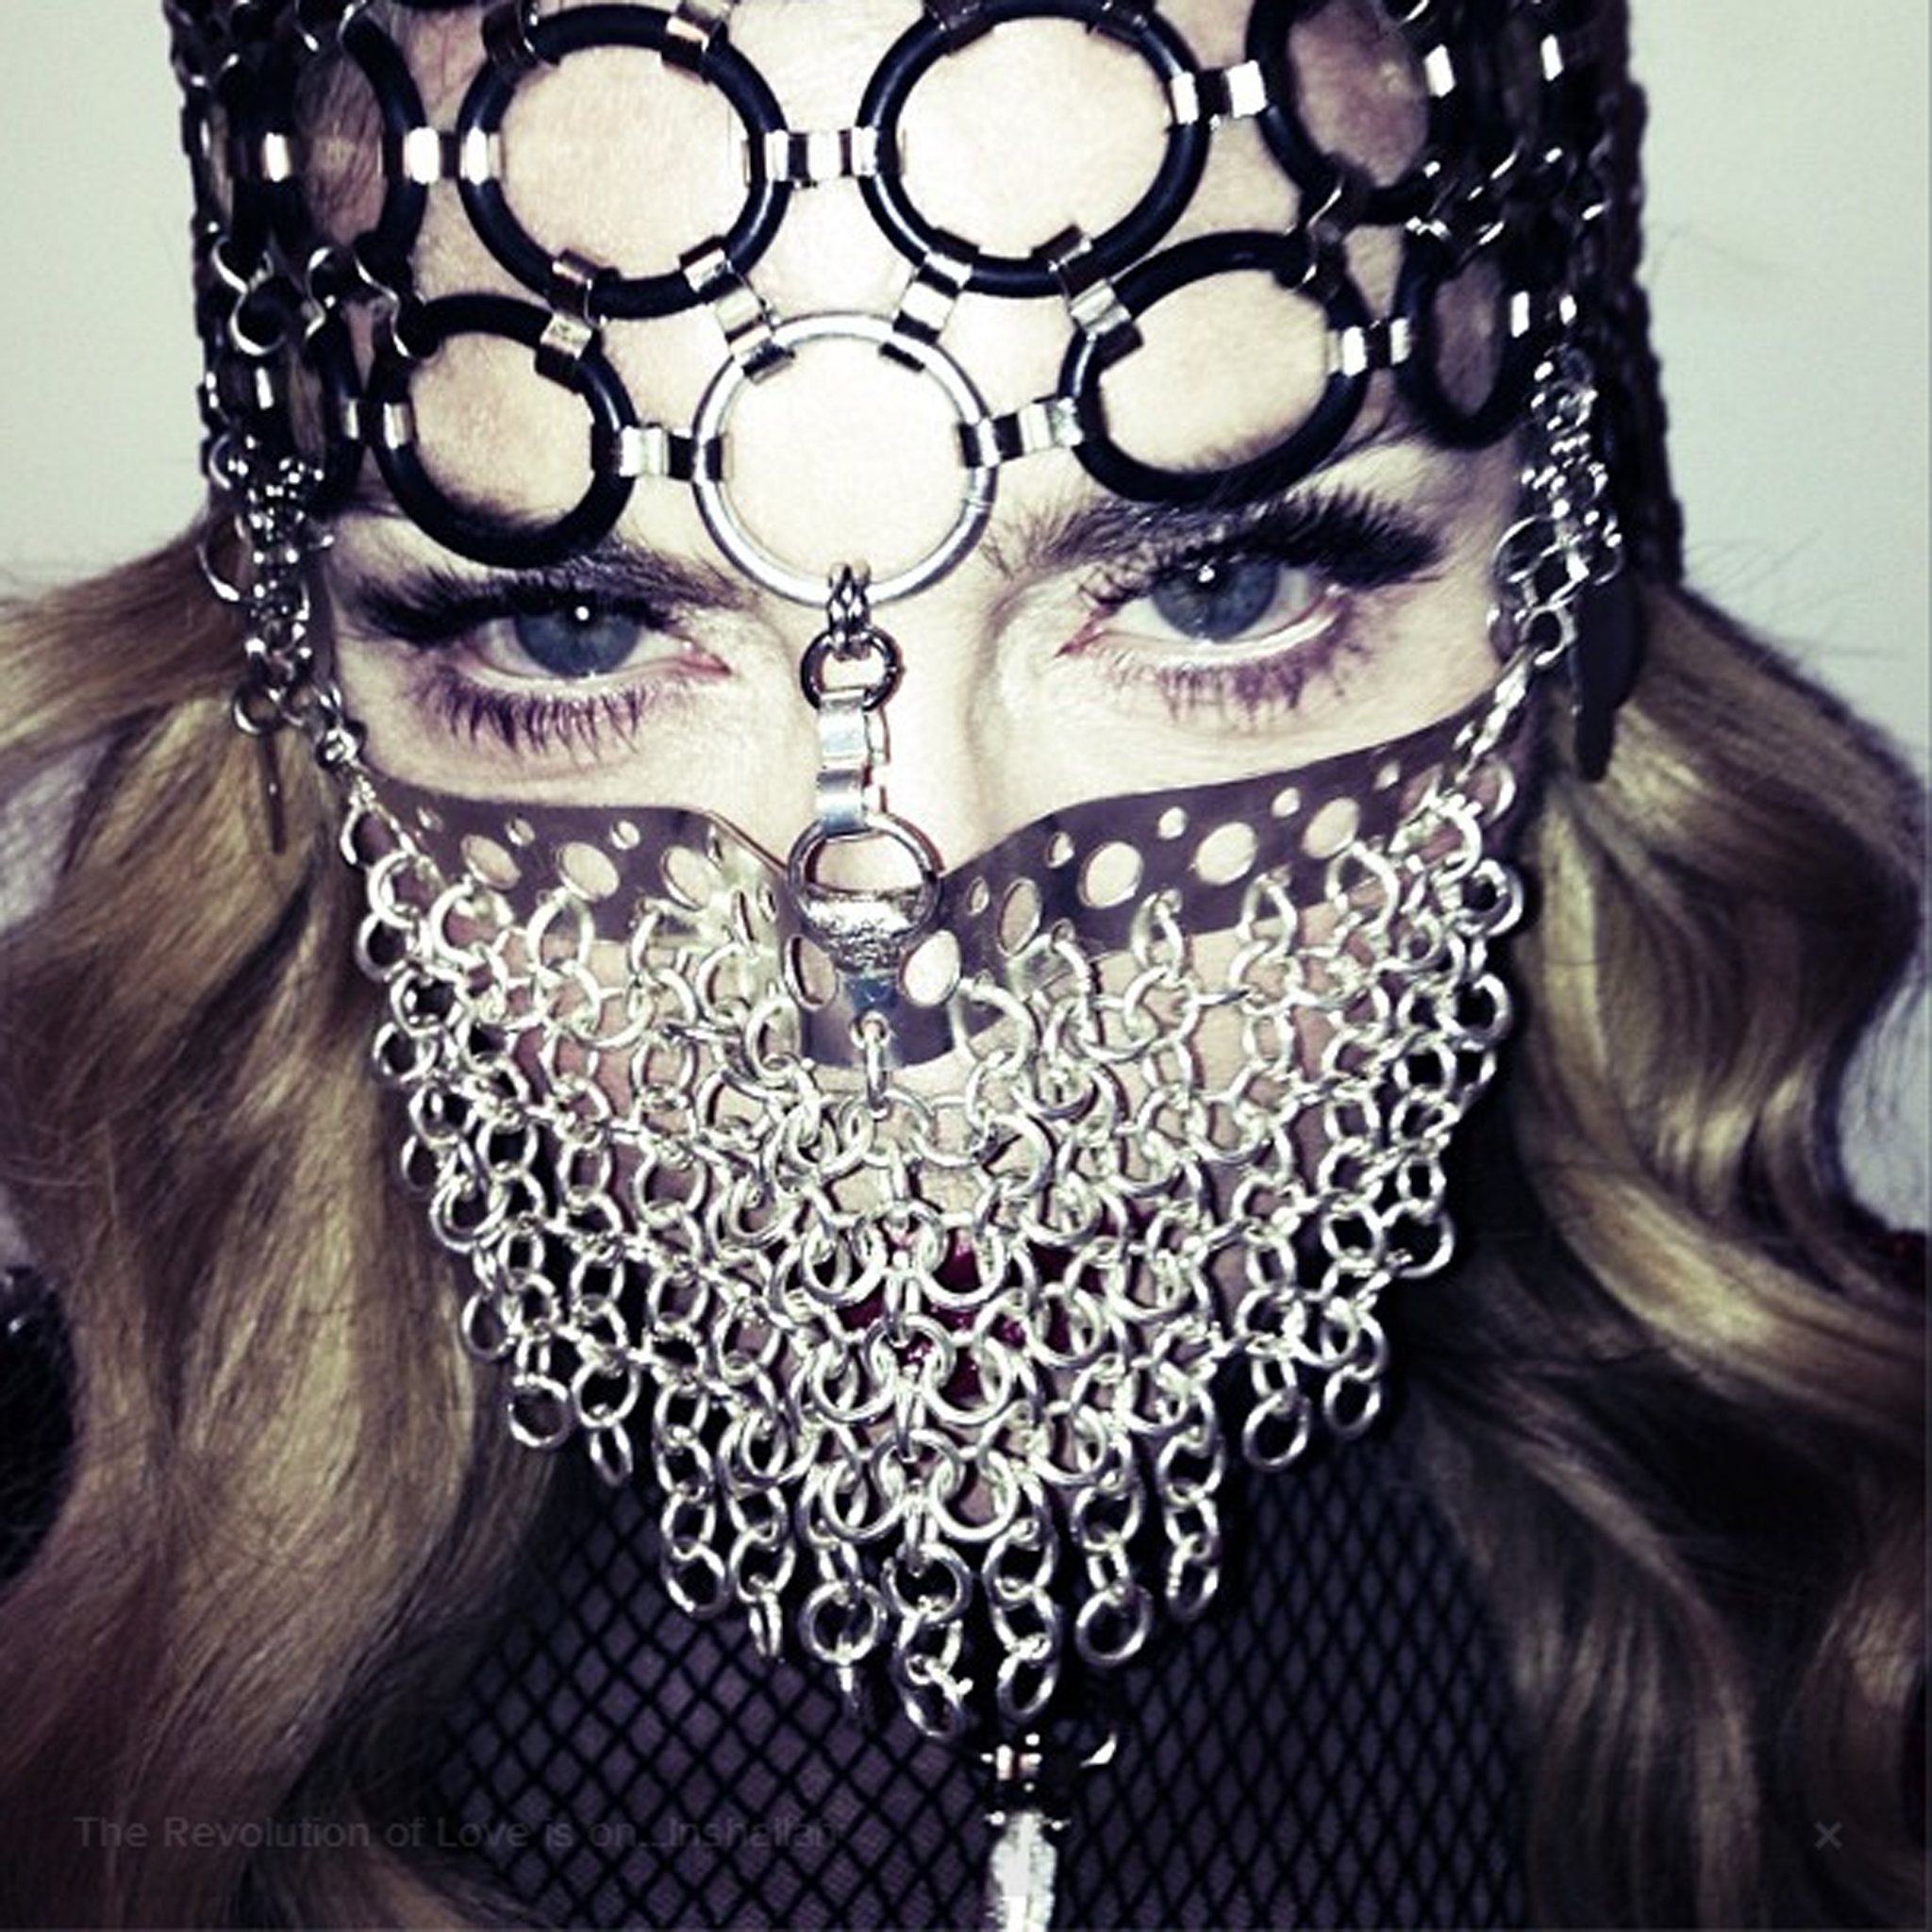 Madonna poses in a chainmail niqab for a photoshoot with US Harper's Bazaar